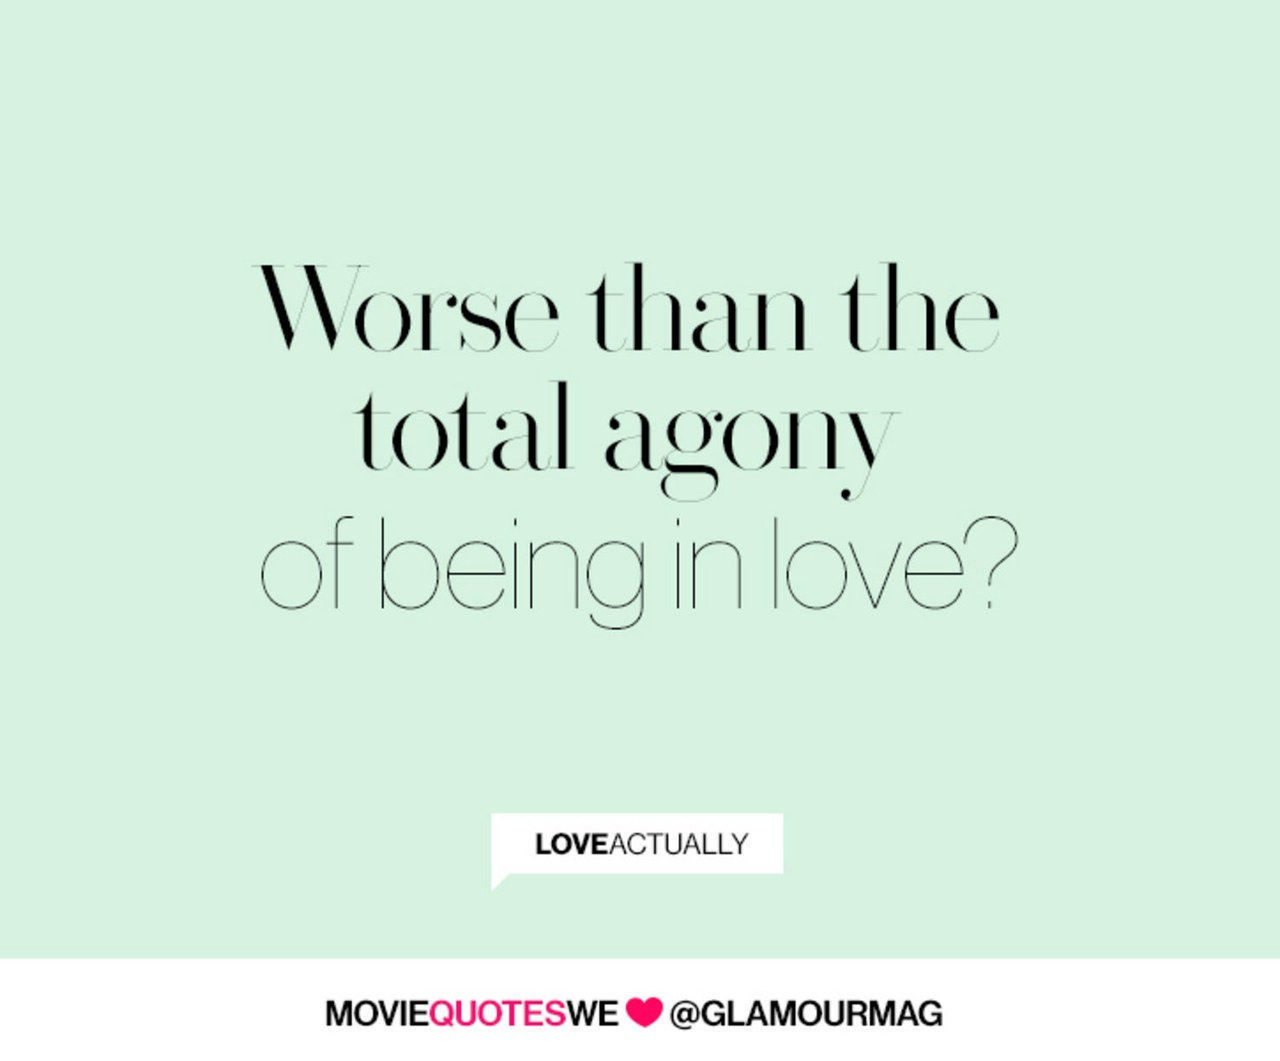 Share These Love Actually Quotes